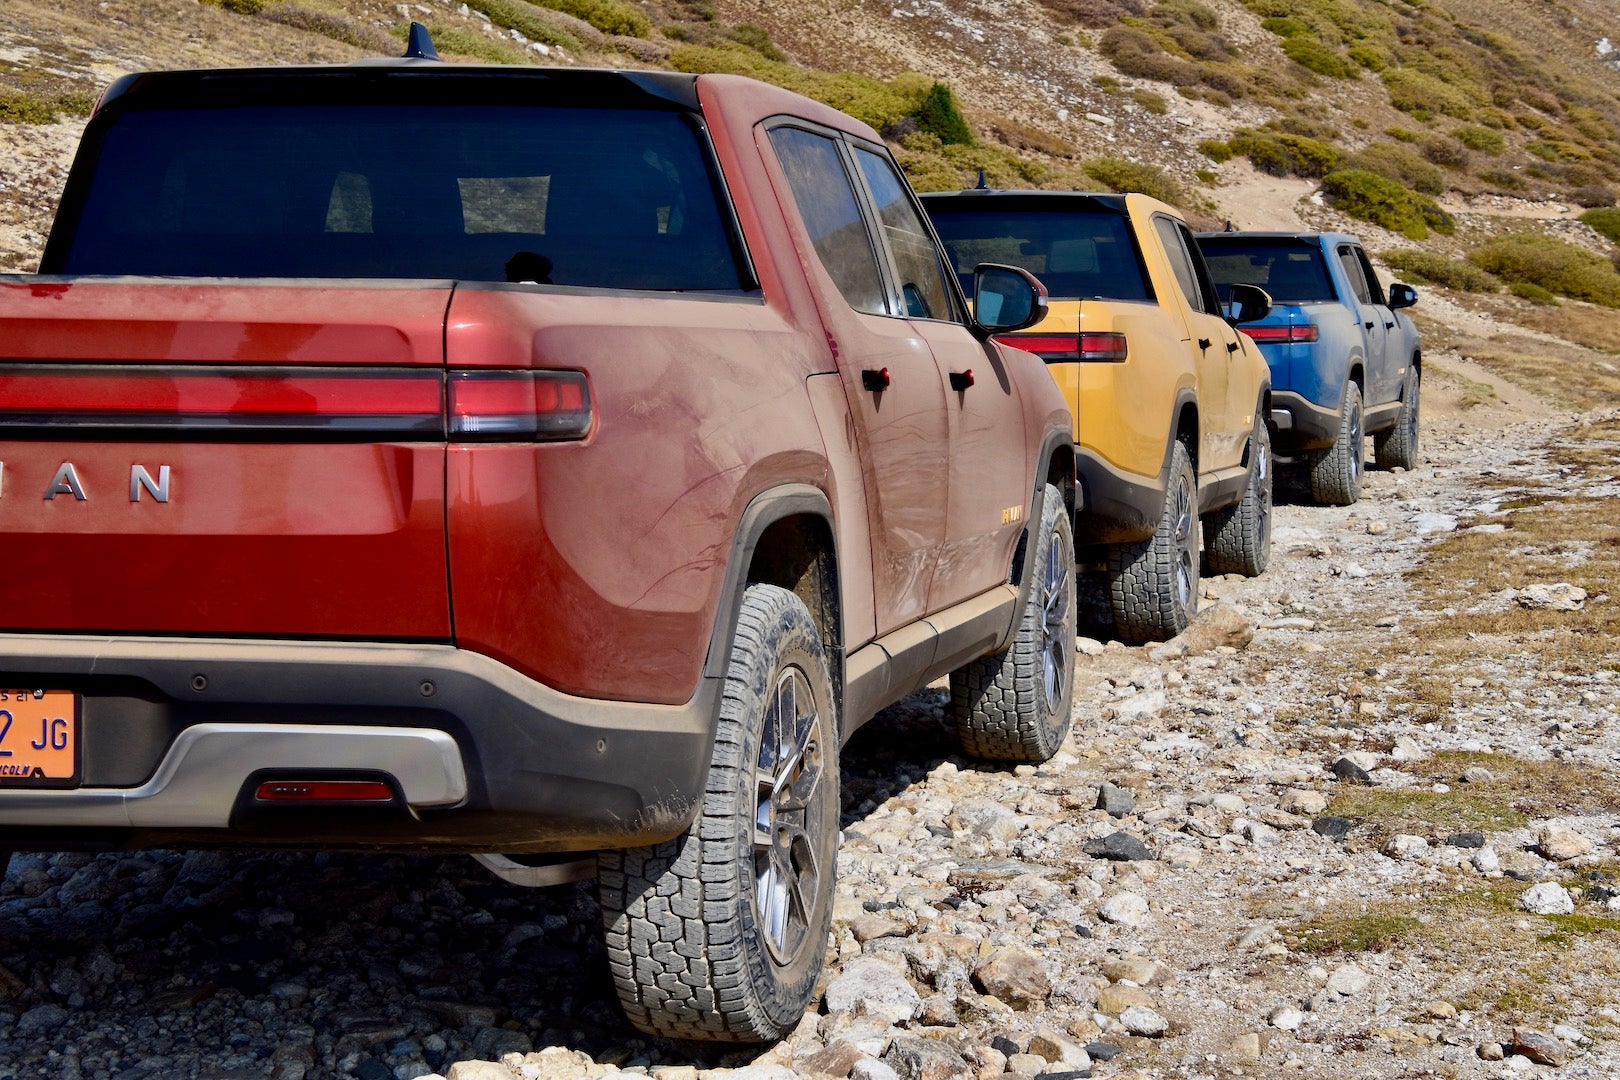 2022 Rivian R1T Launch Edition in red, yellow, and blue